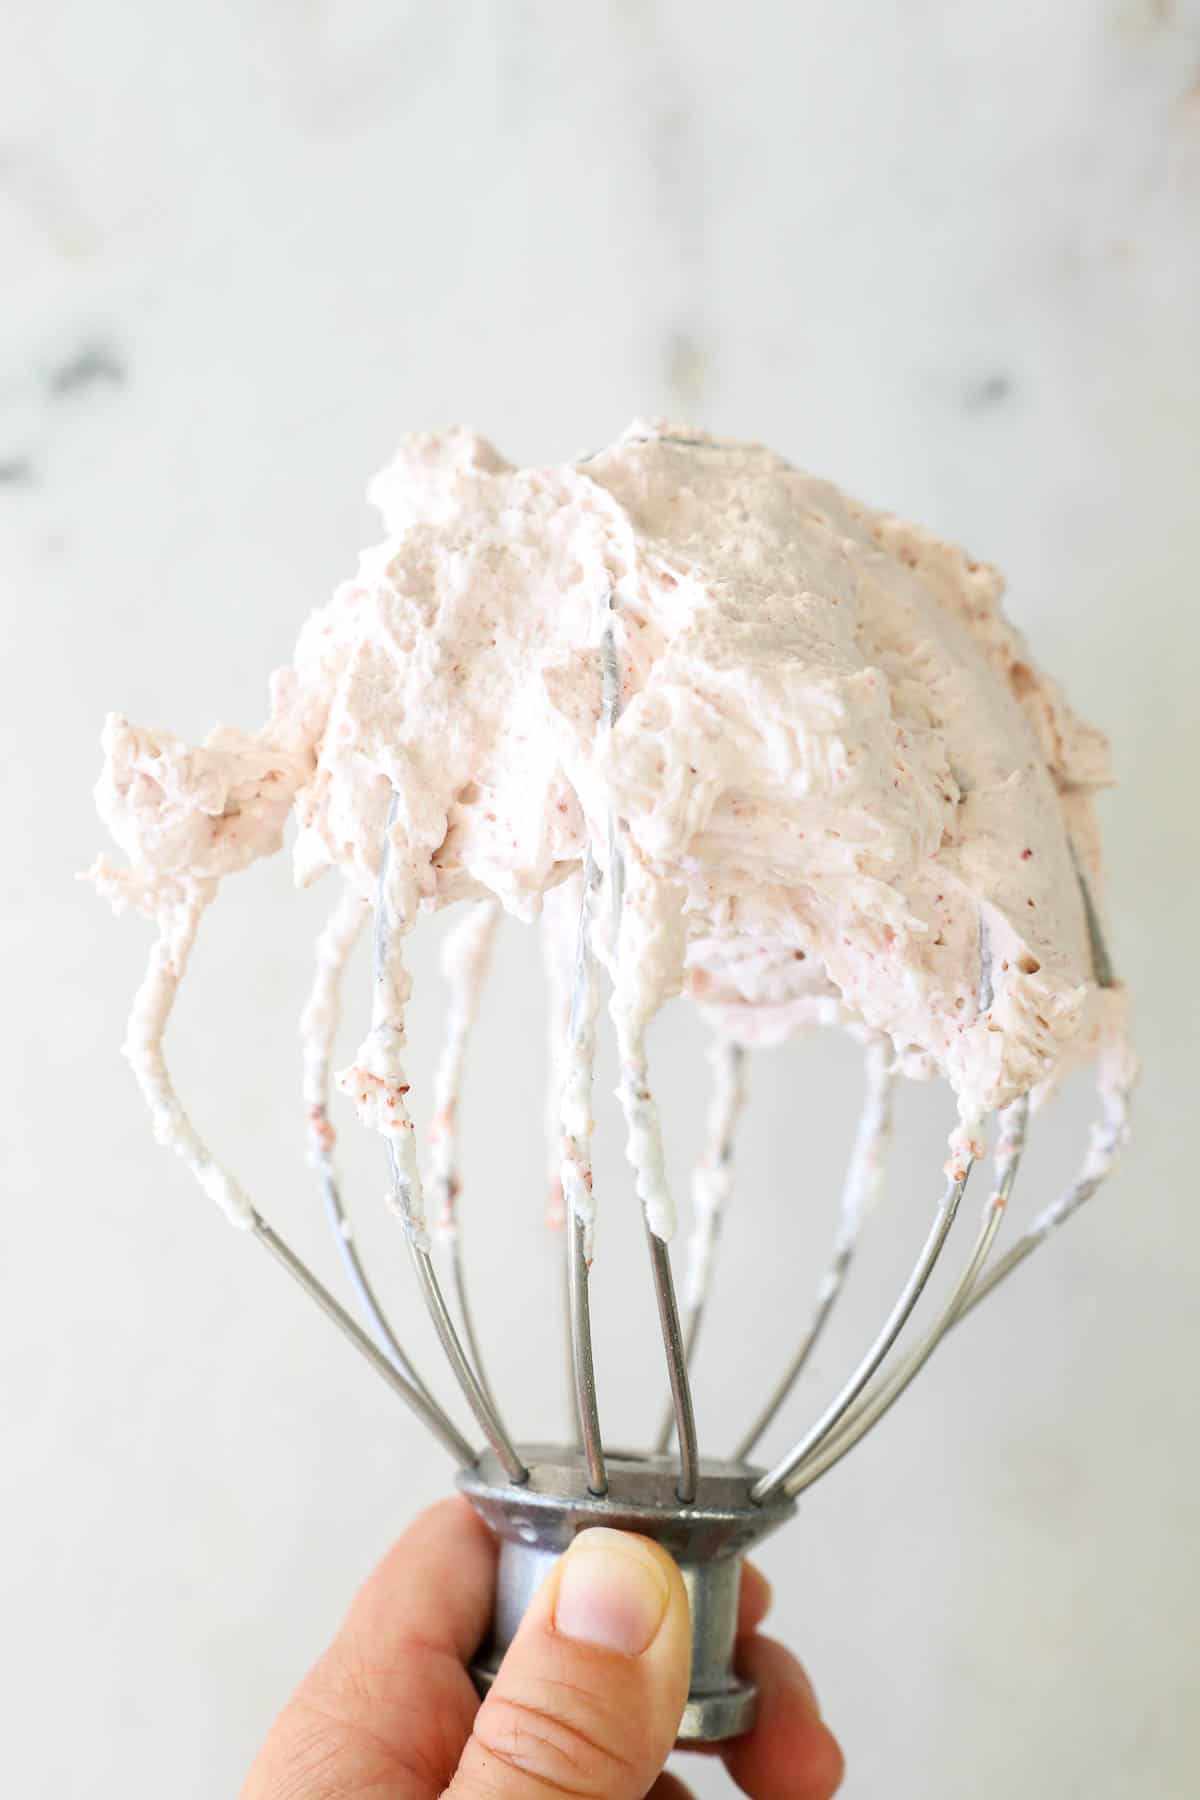 A KitchenAid Whisk attachment with strawberry whipped cream